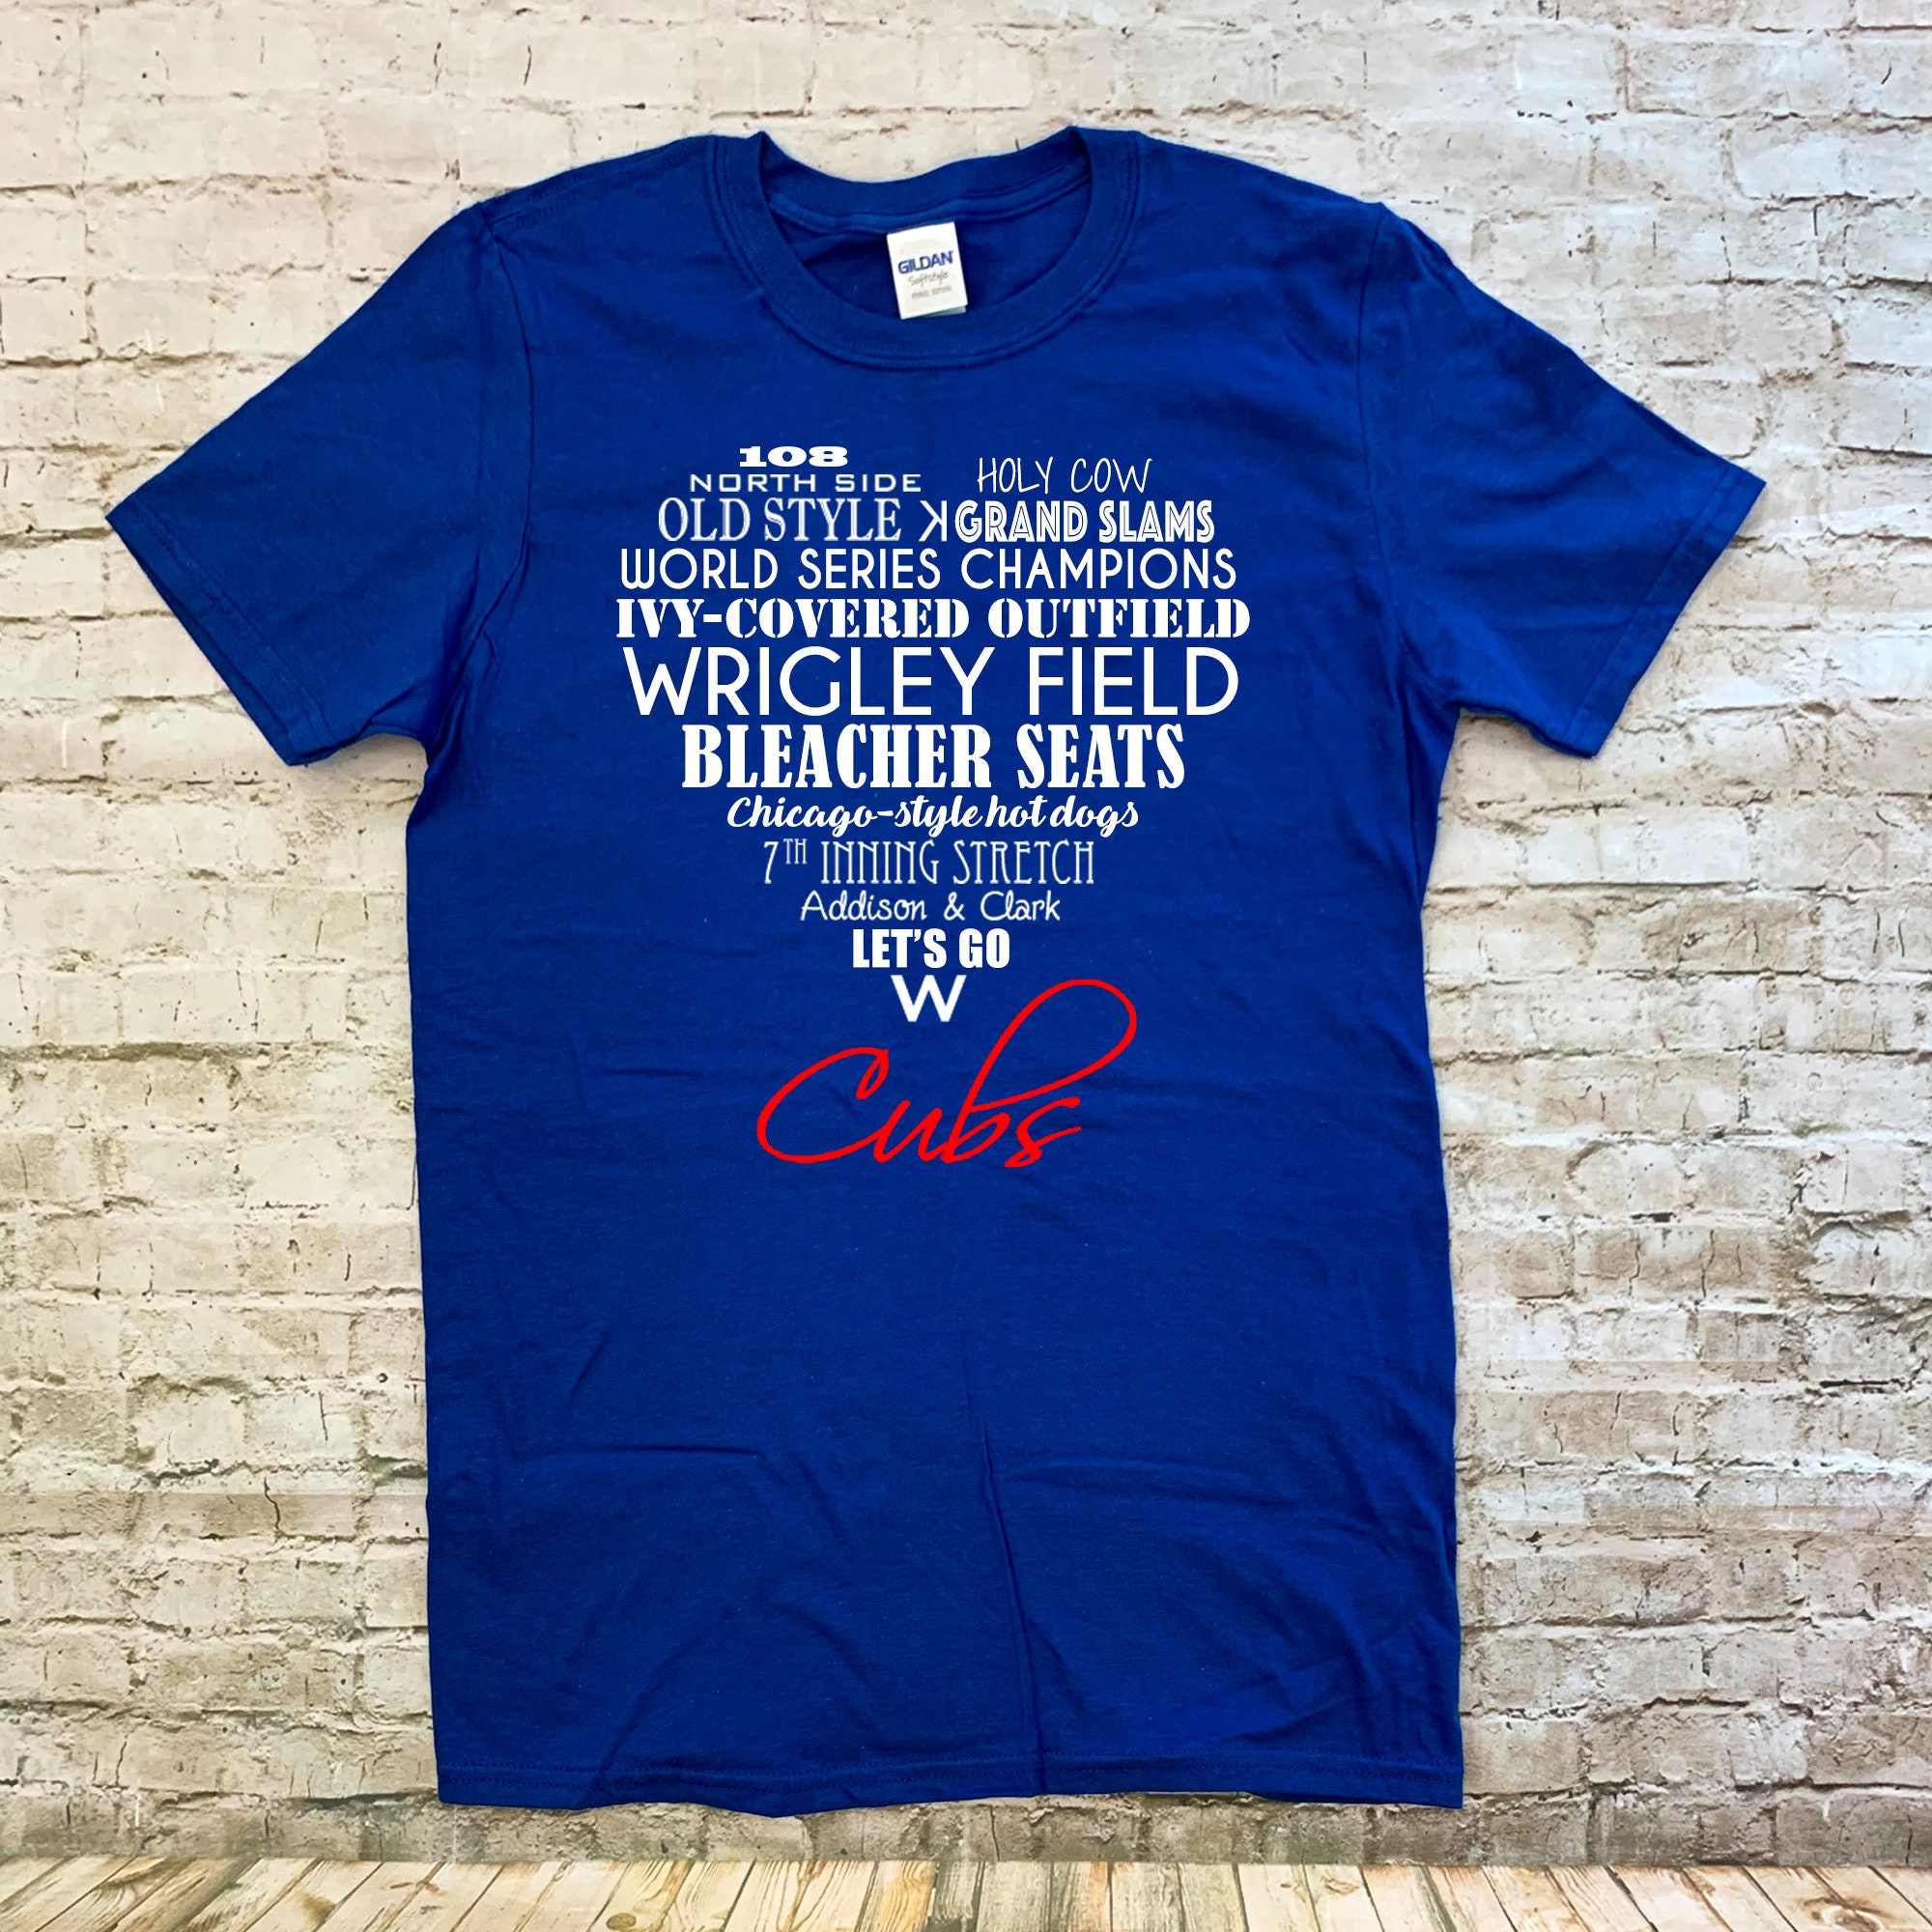 After9desi9ns Love Chicago Cubs Women's Tank Top/T-shirt/Raglan, Favorite Things of The Chicago Cubs' Shirt | I Love The Chicago Cubs Shirt | Heart Cubs